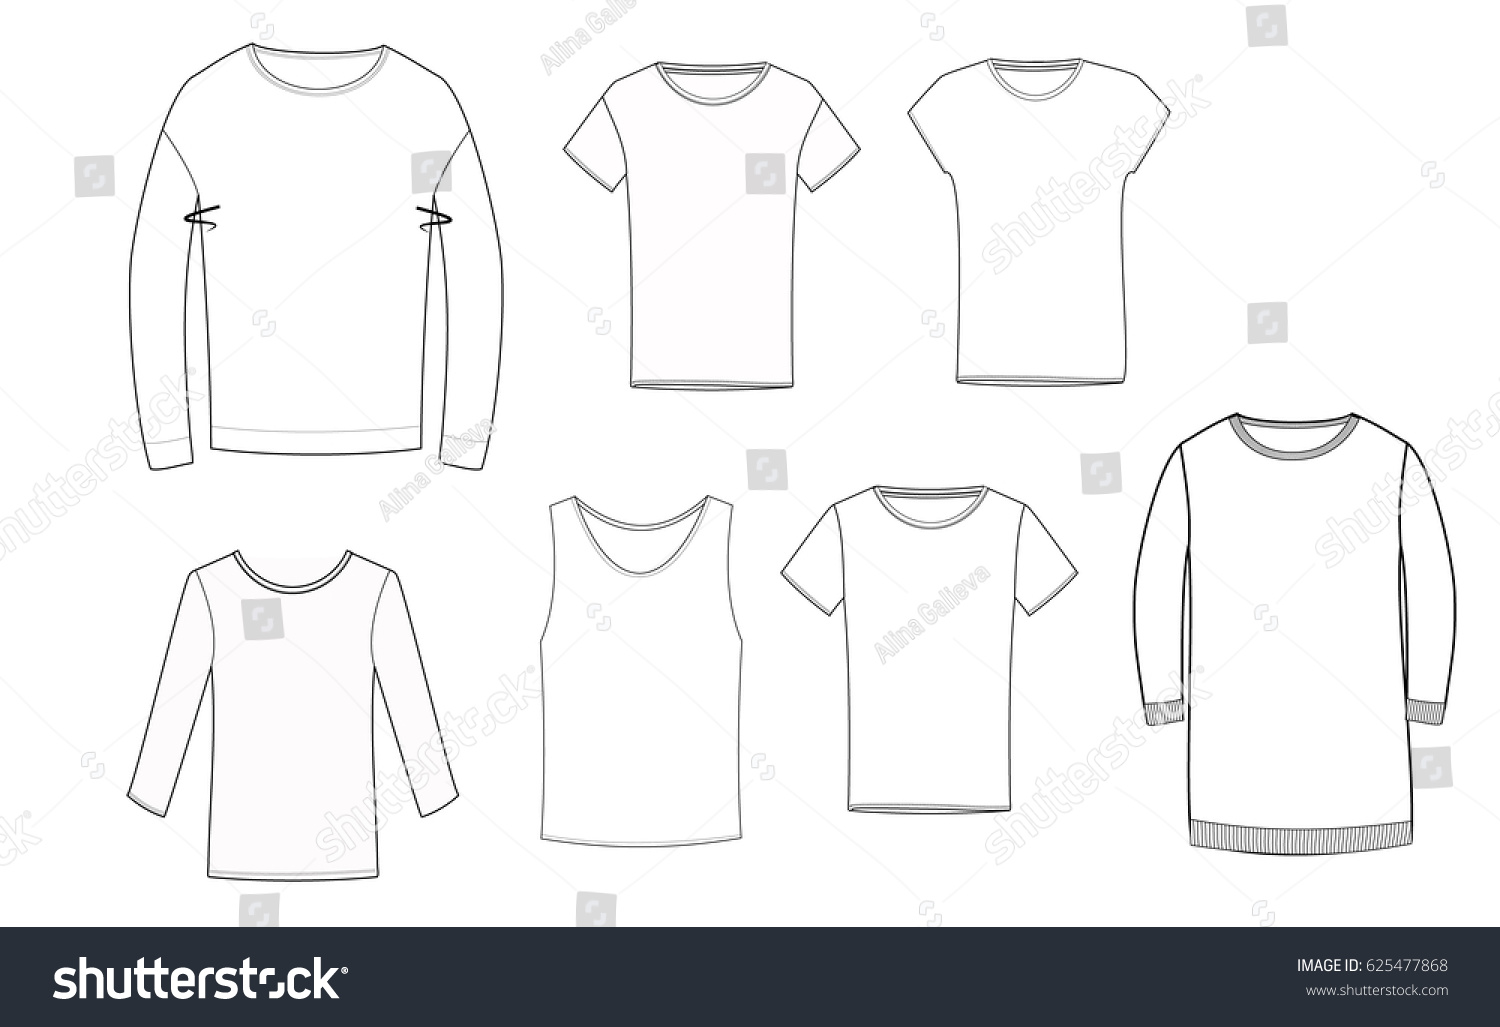 Tshirts Longsleeves St Fashion Technical Drawing Stock Vector (Royalty ...